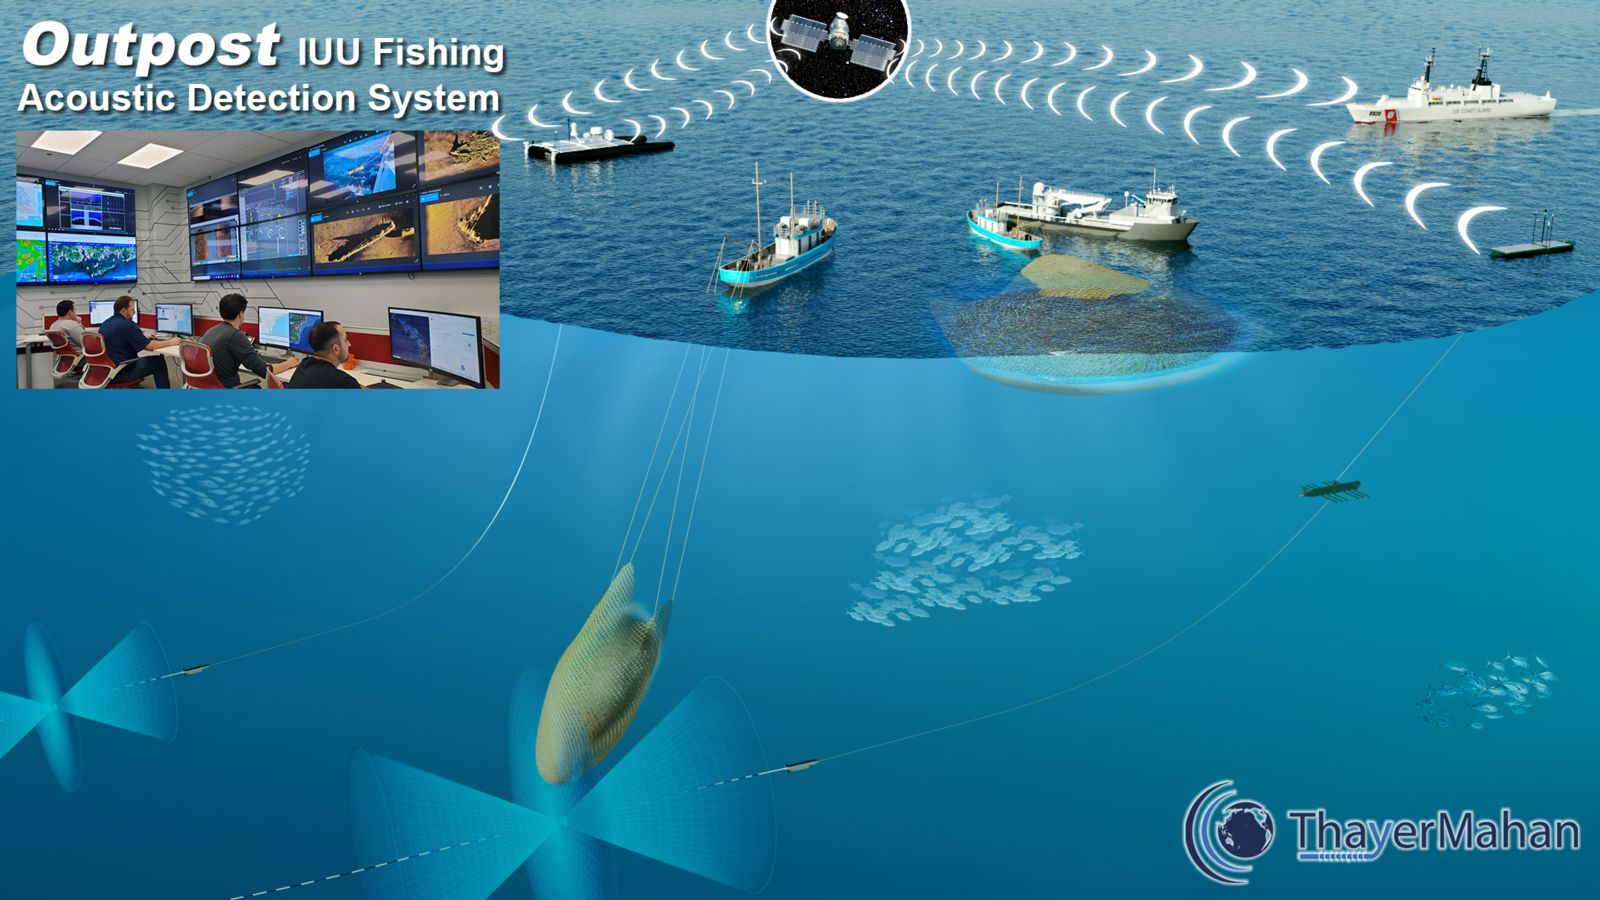 Diagram of ThayerMahan’s Outpost system identifying, localizing, and reporting illegal fishing